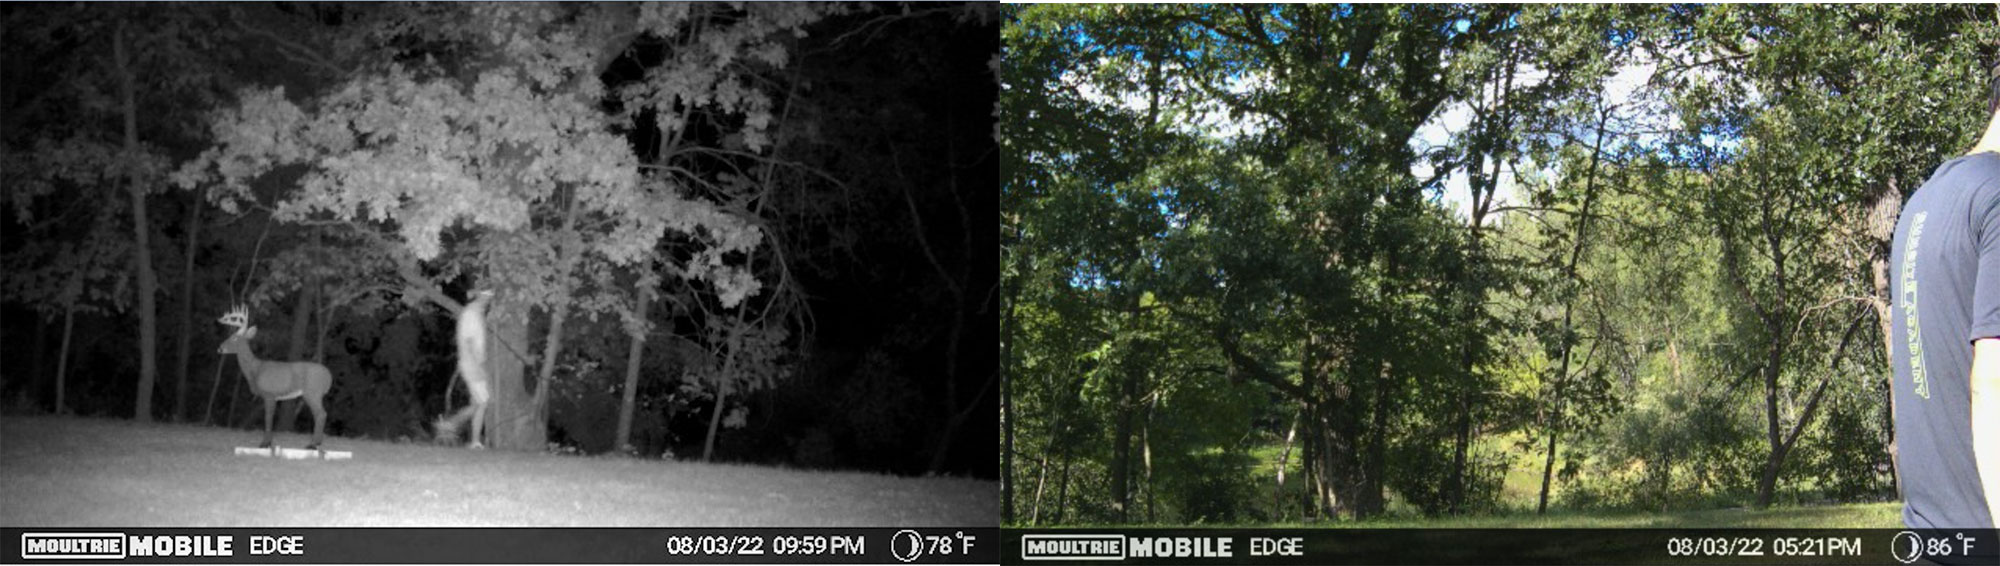 Moultrie mobile edge